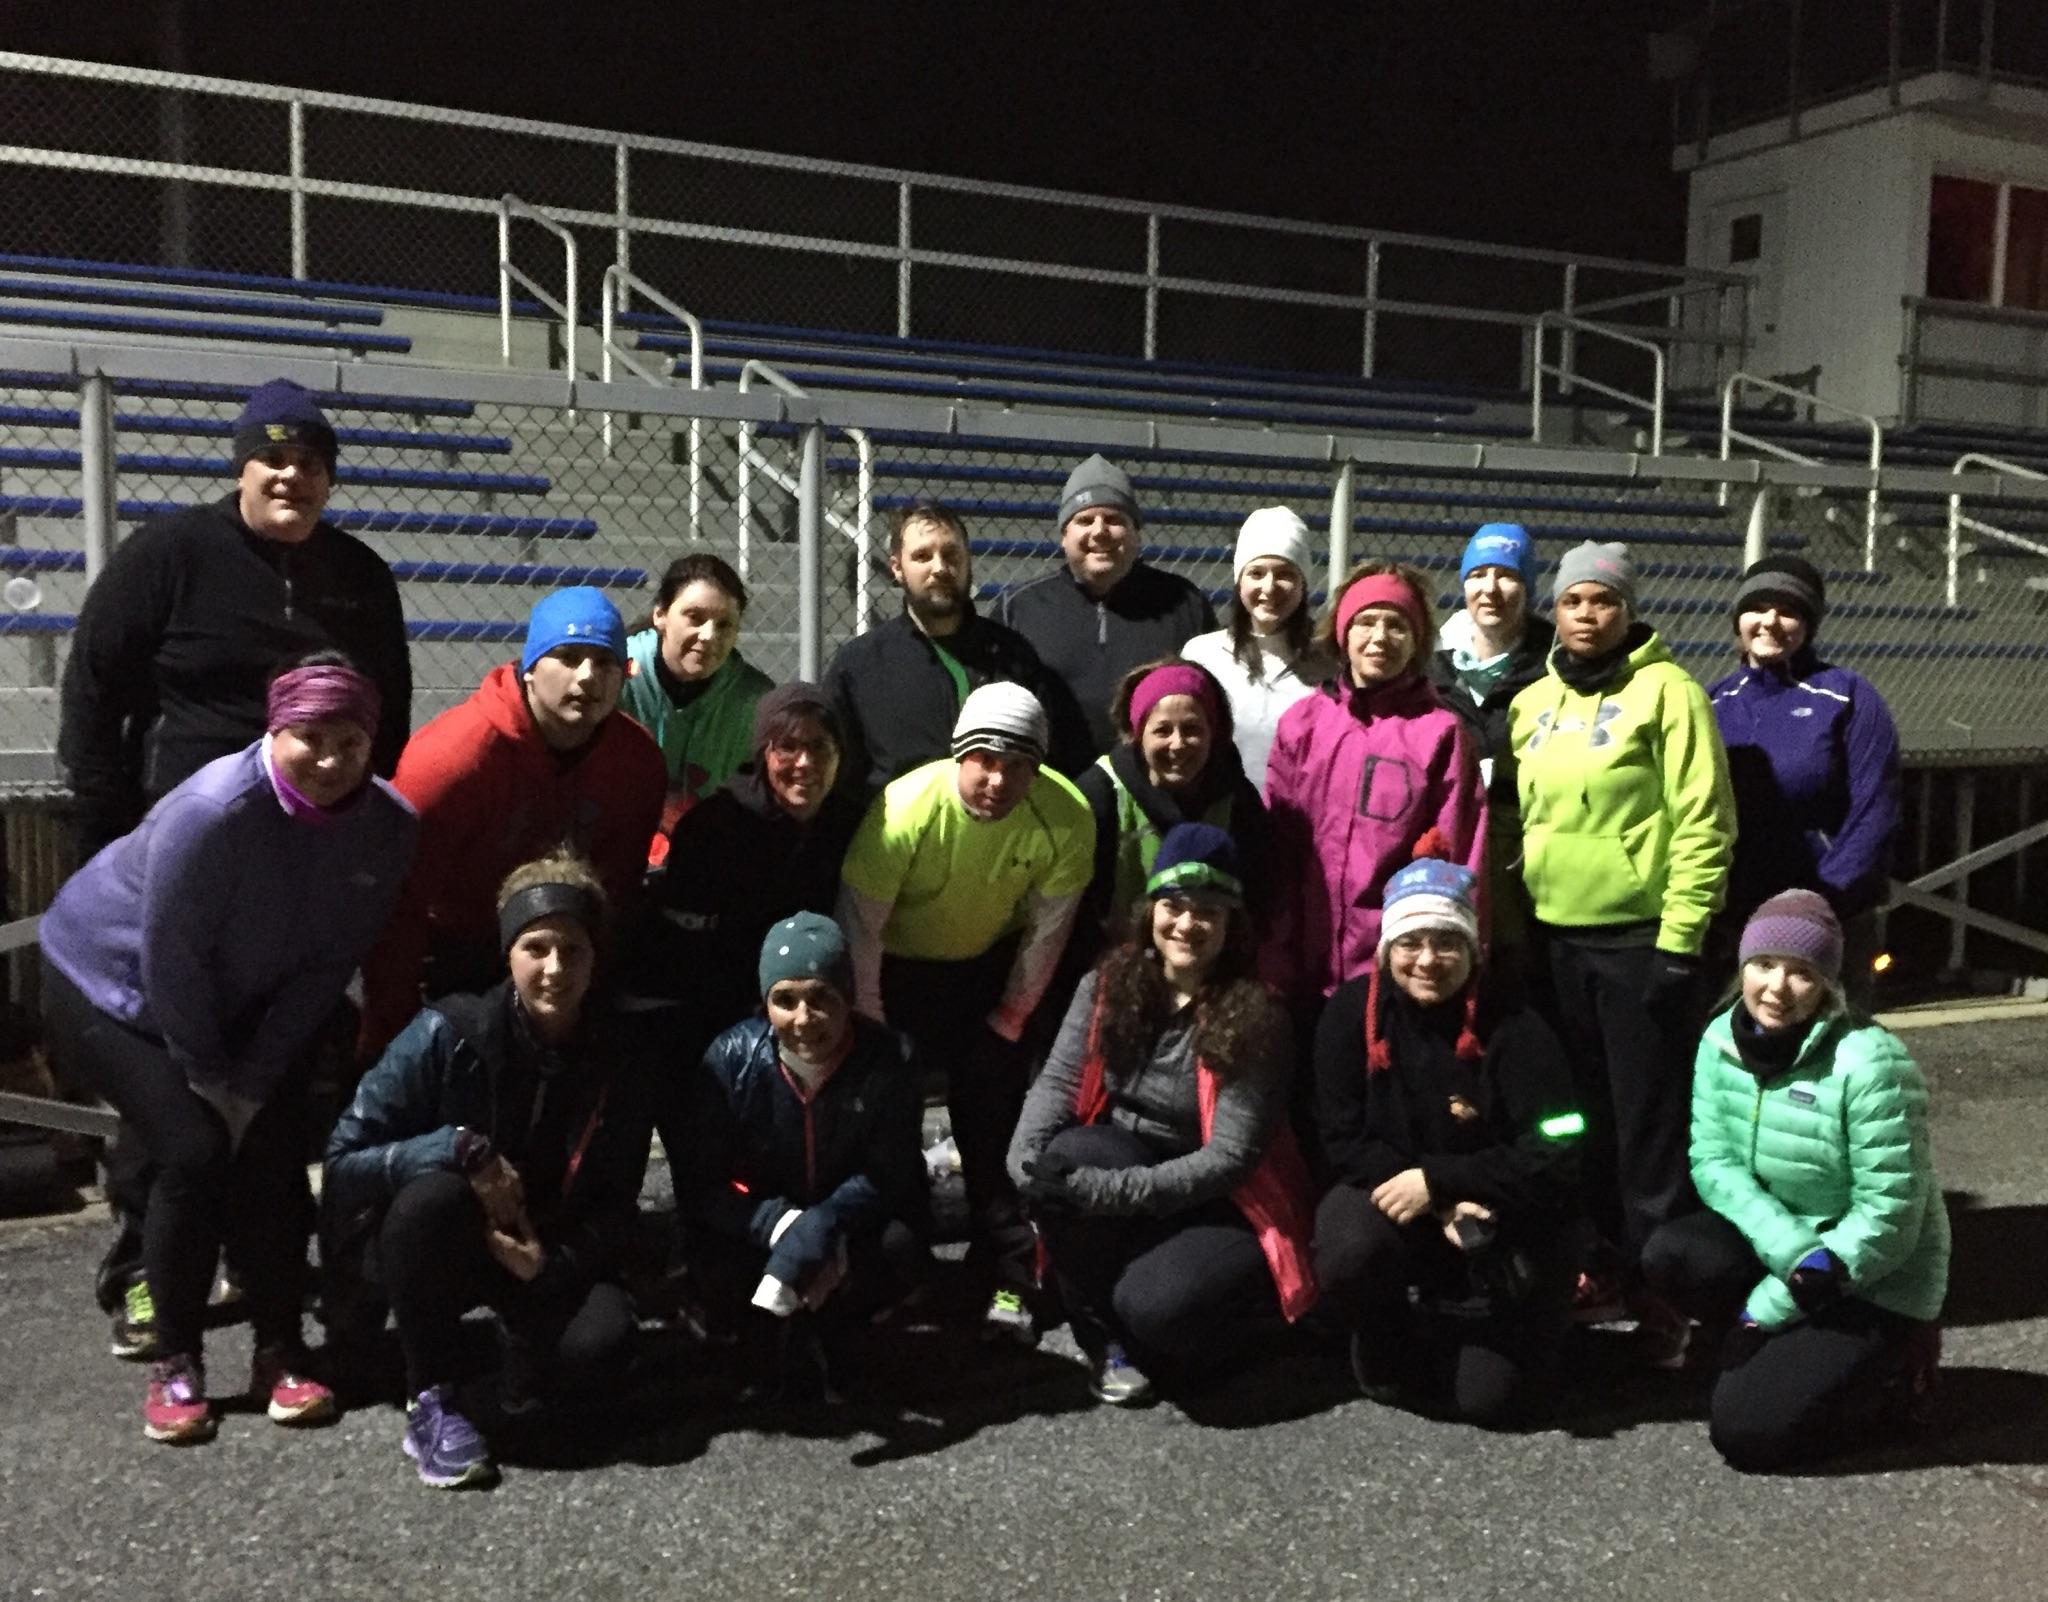 Our Timonium 5k training group all bundled up after Thursday's run!